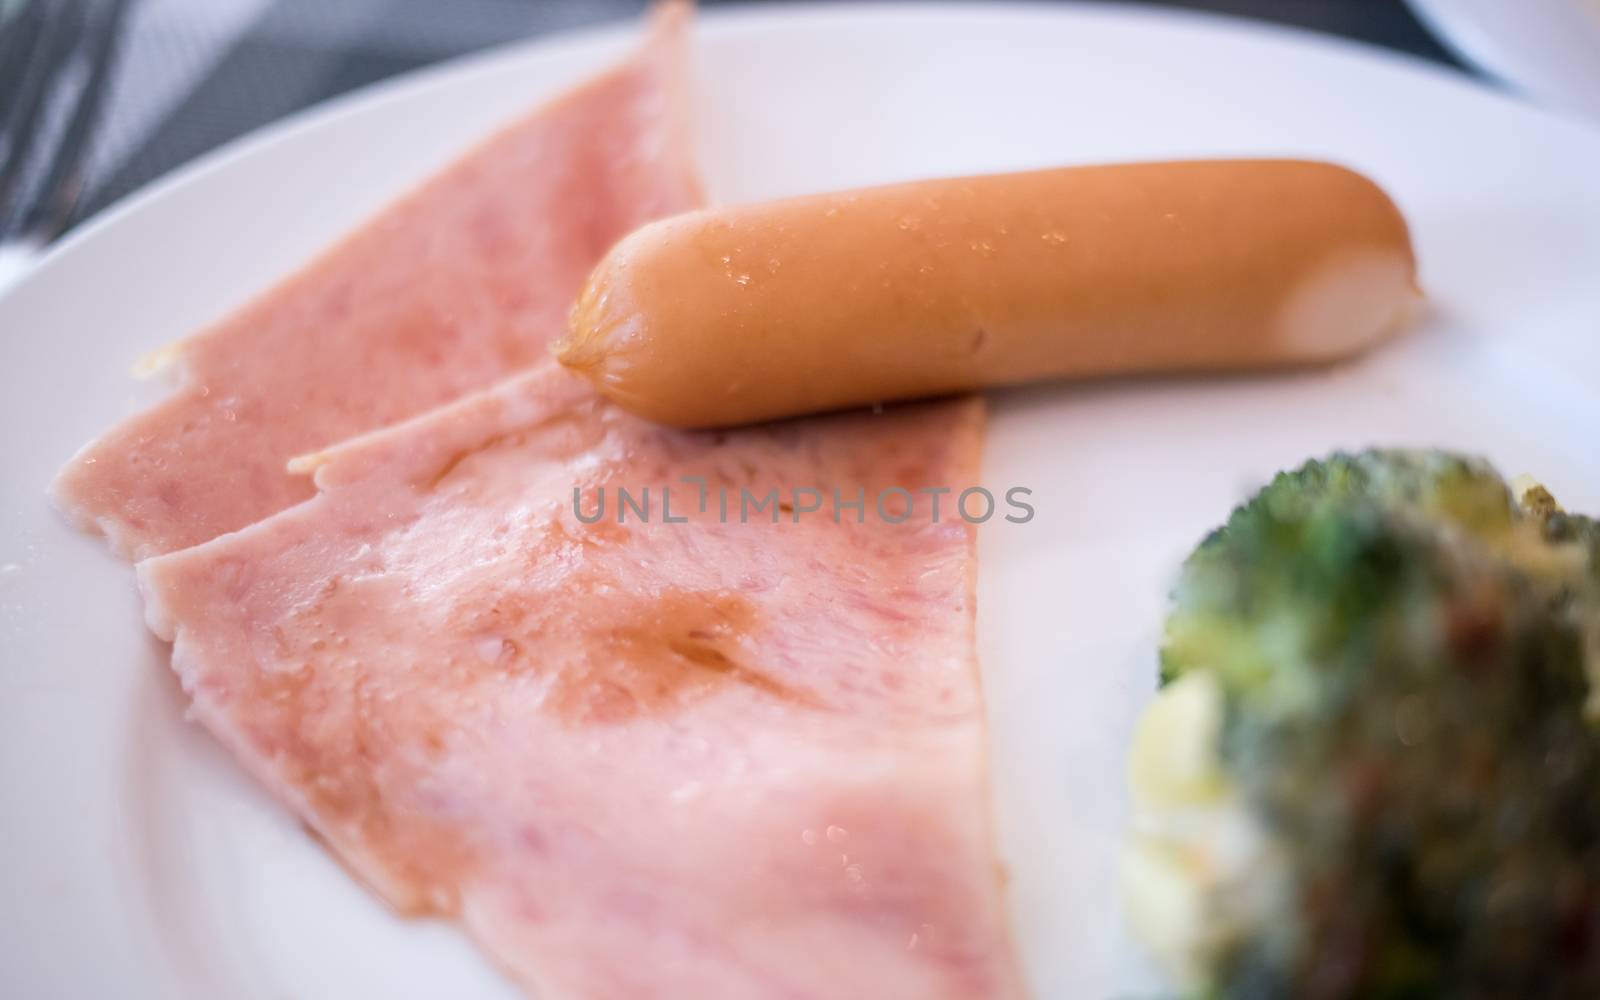 sausage with ham on the white plate on breakfast table